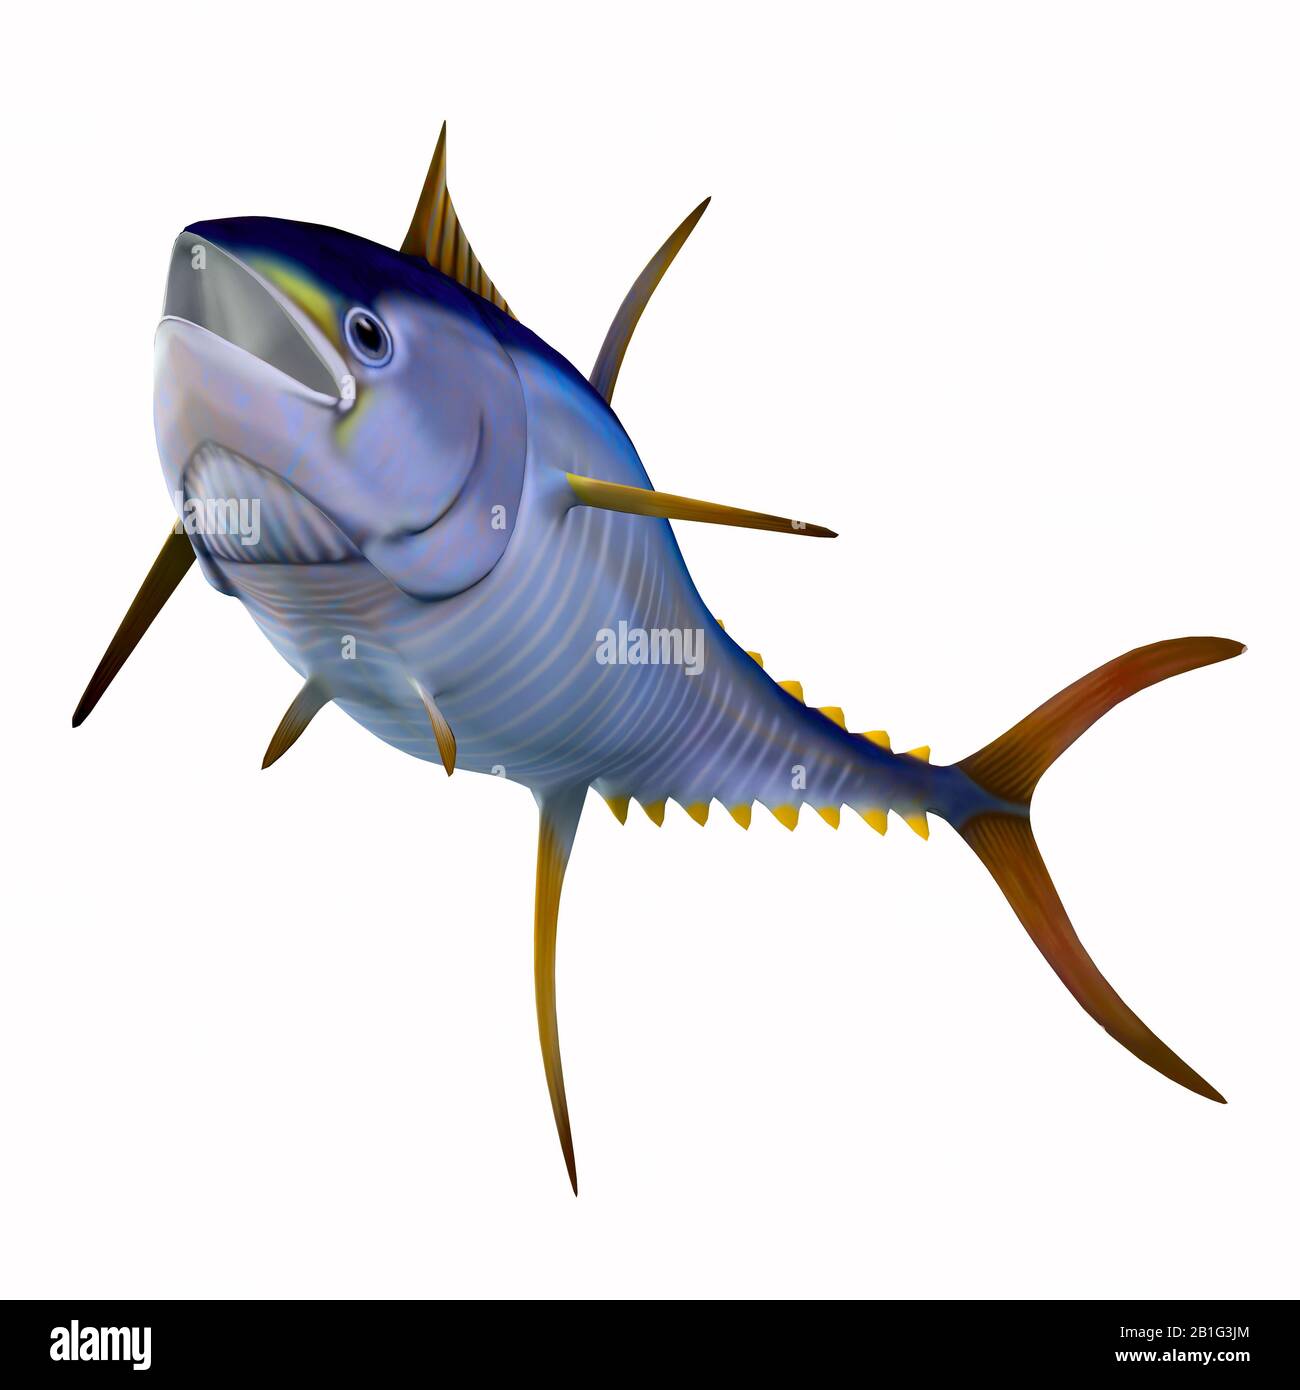 The Yellowfin tuna is a fast swimming predator that is found in worldwide oceans in large schools. Stock Photo